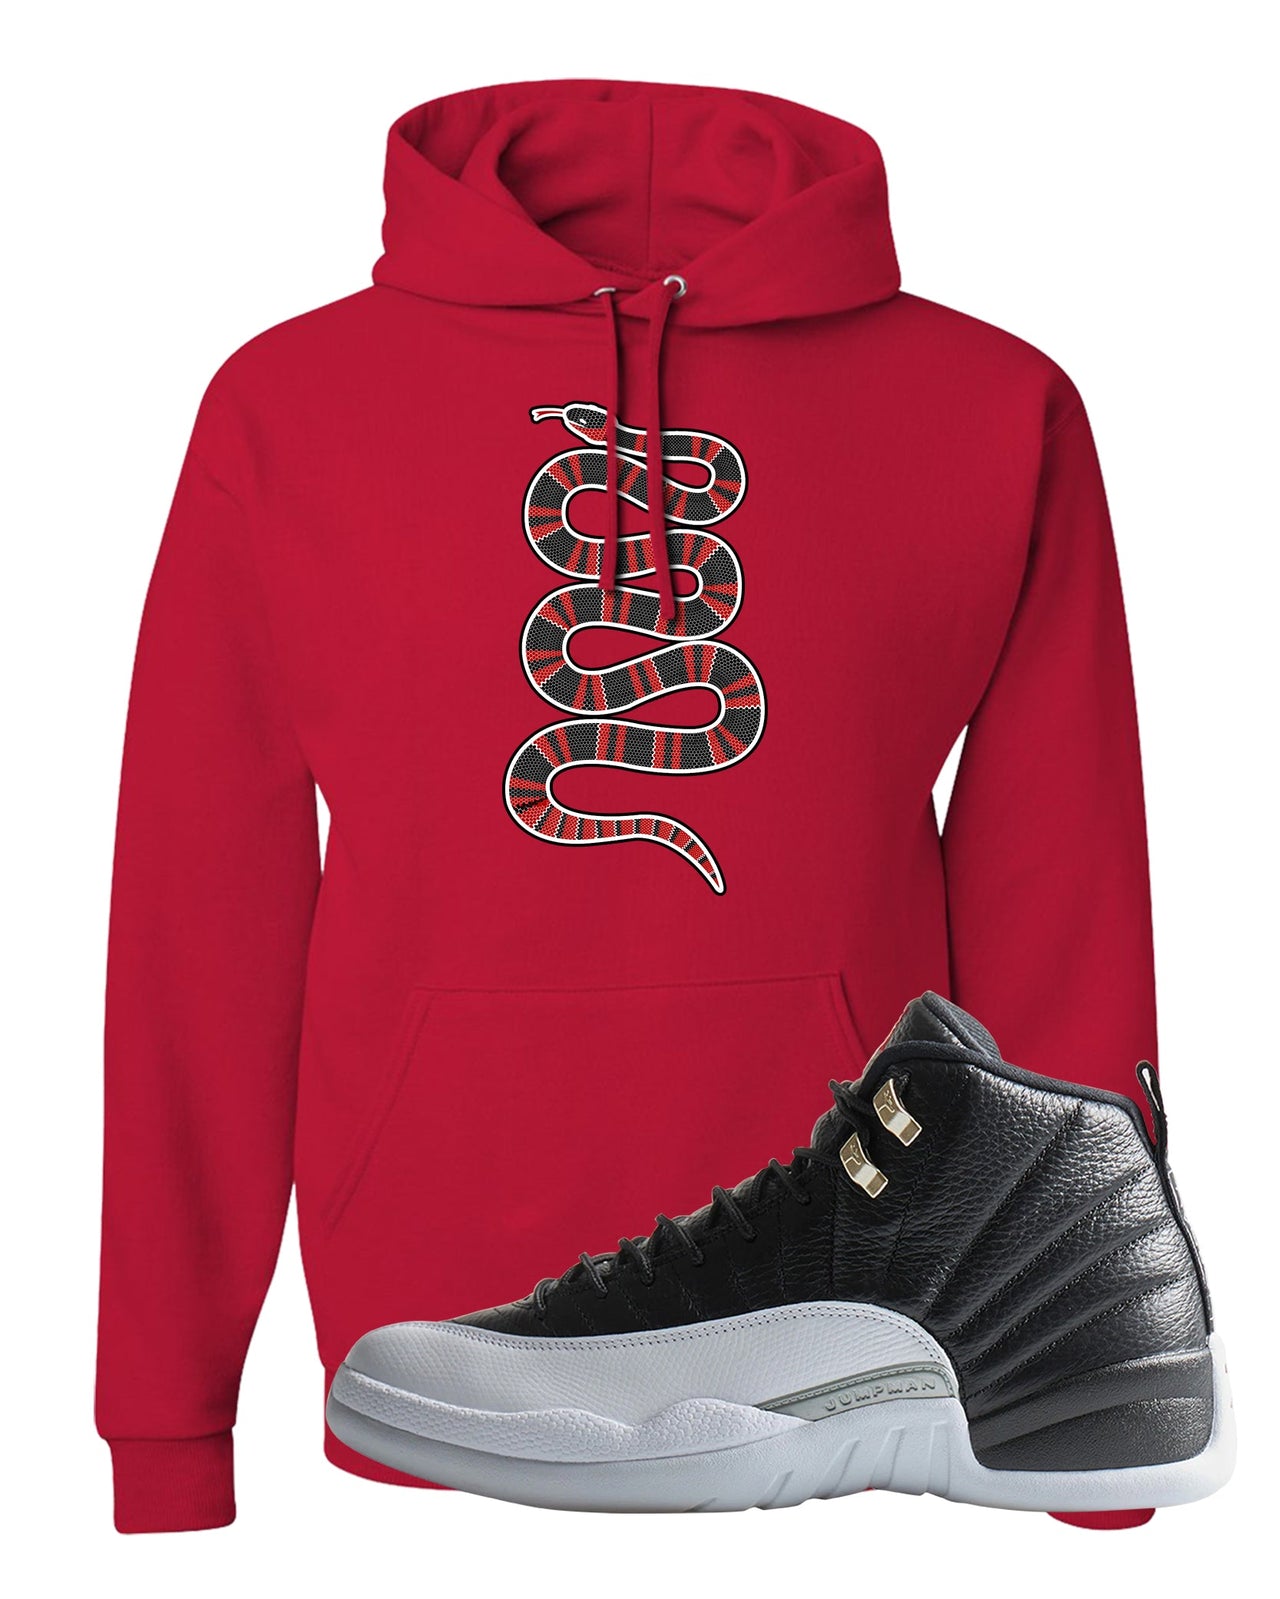 Playoff 12s Hoodie | Coiled Snake, Red